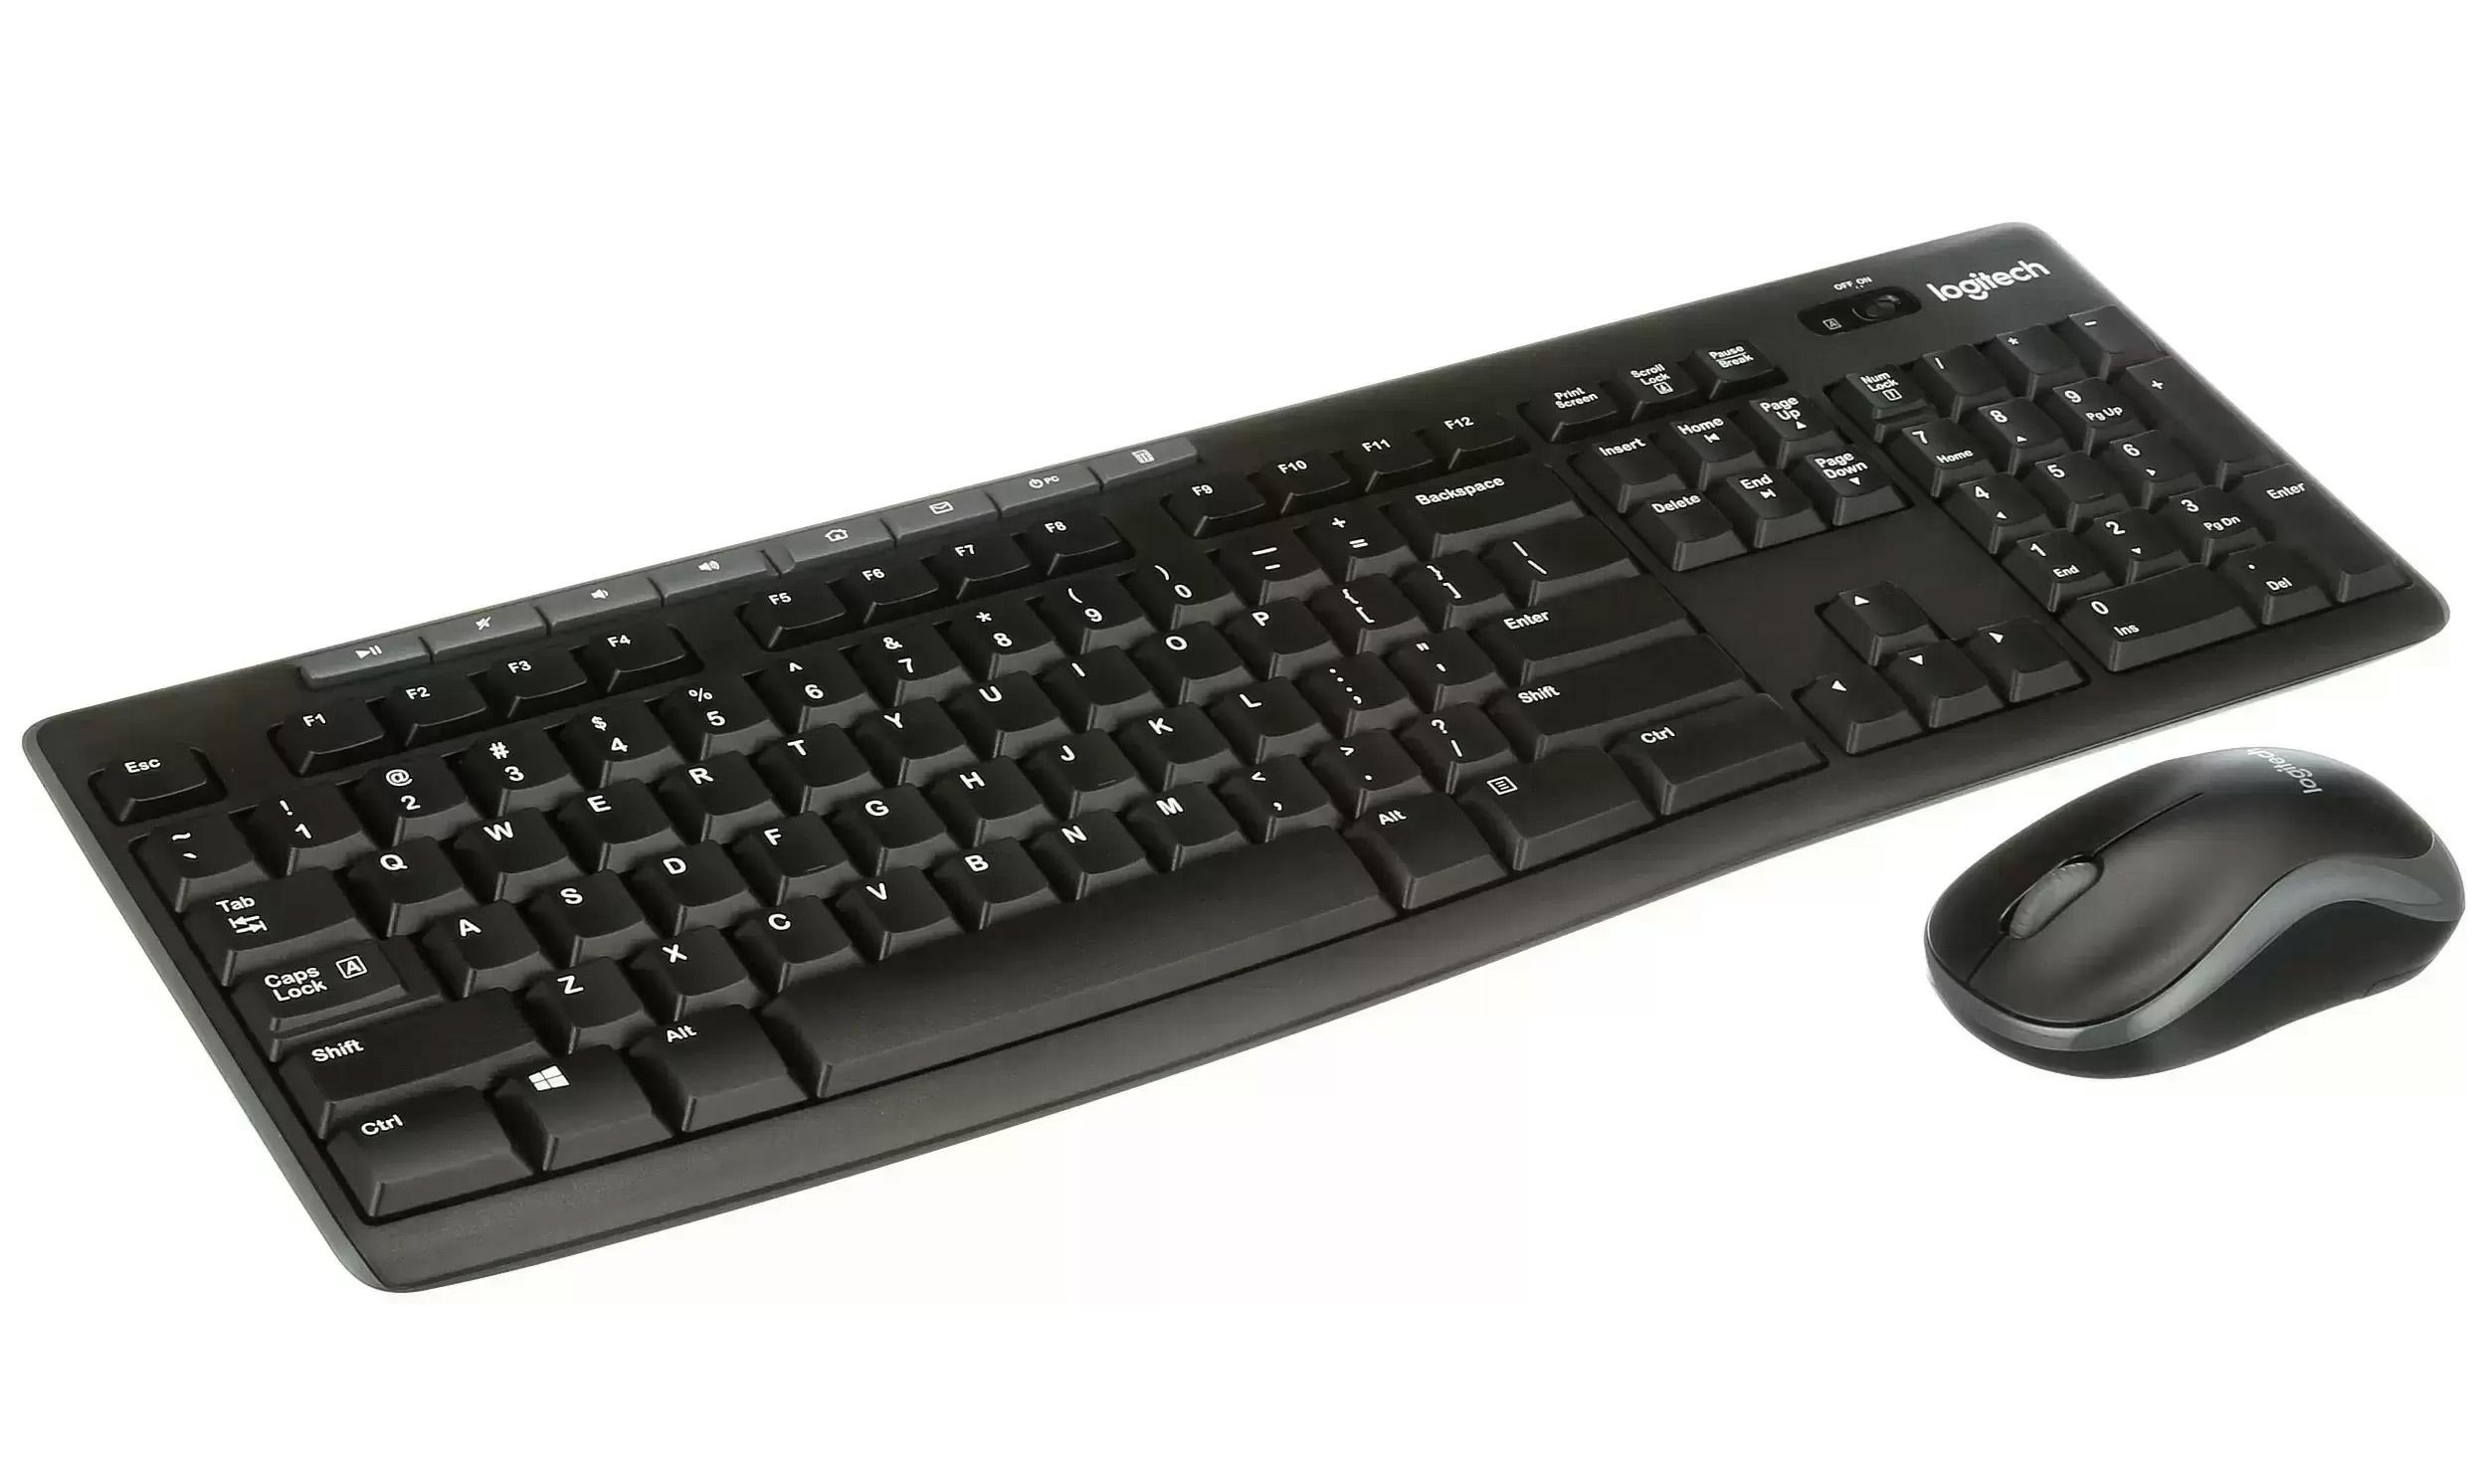 Logitech MK270 Full-Size Wireless Keyboard and Mouse for $17.98